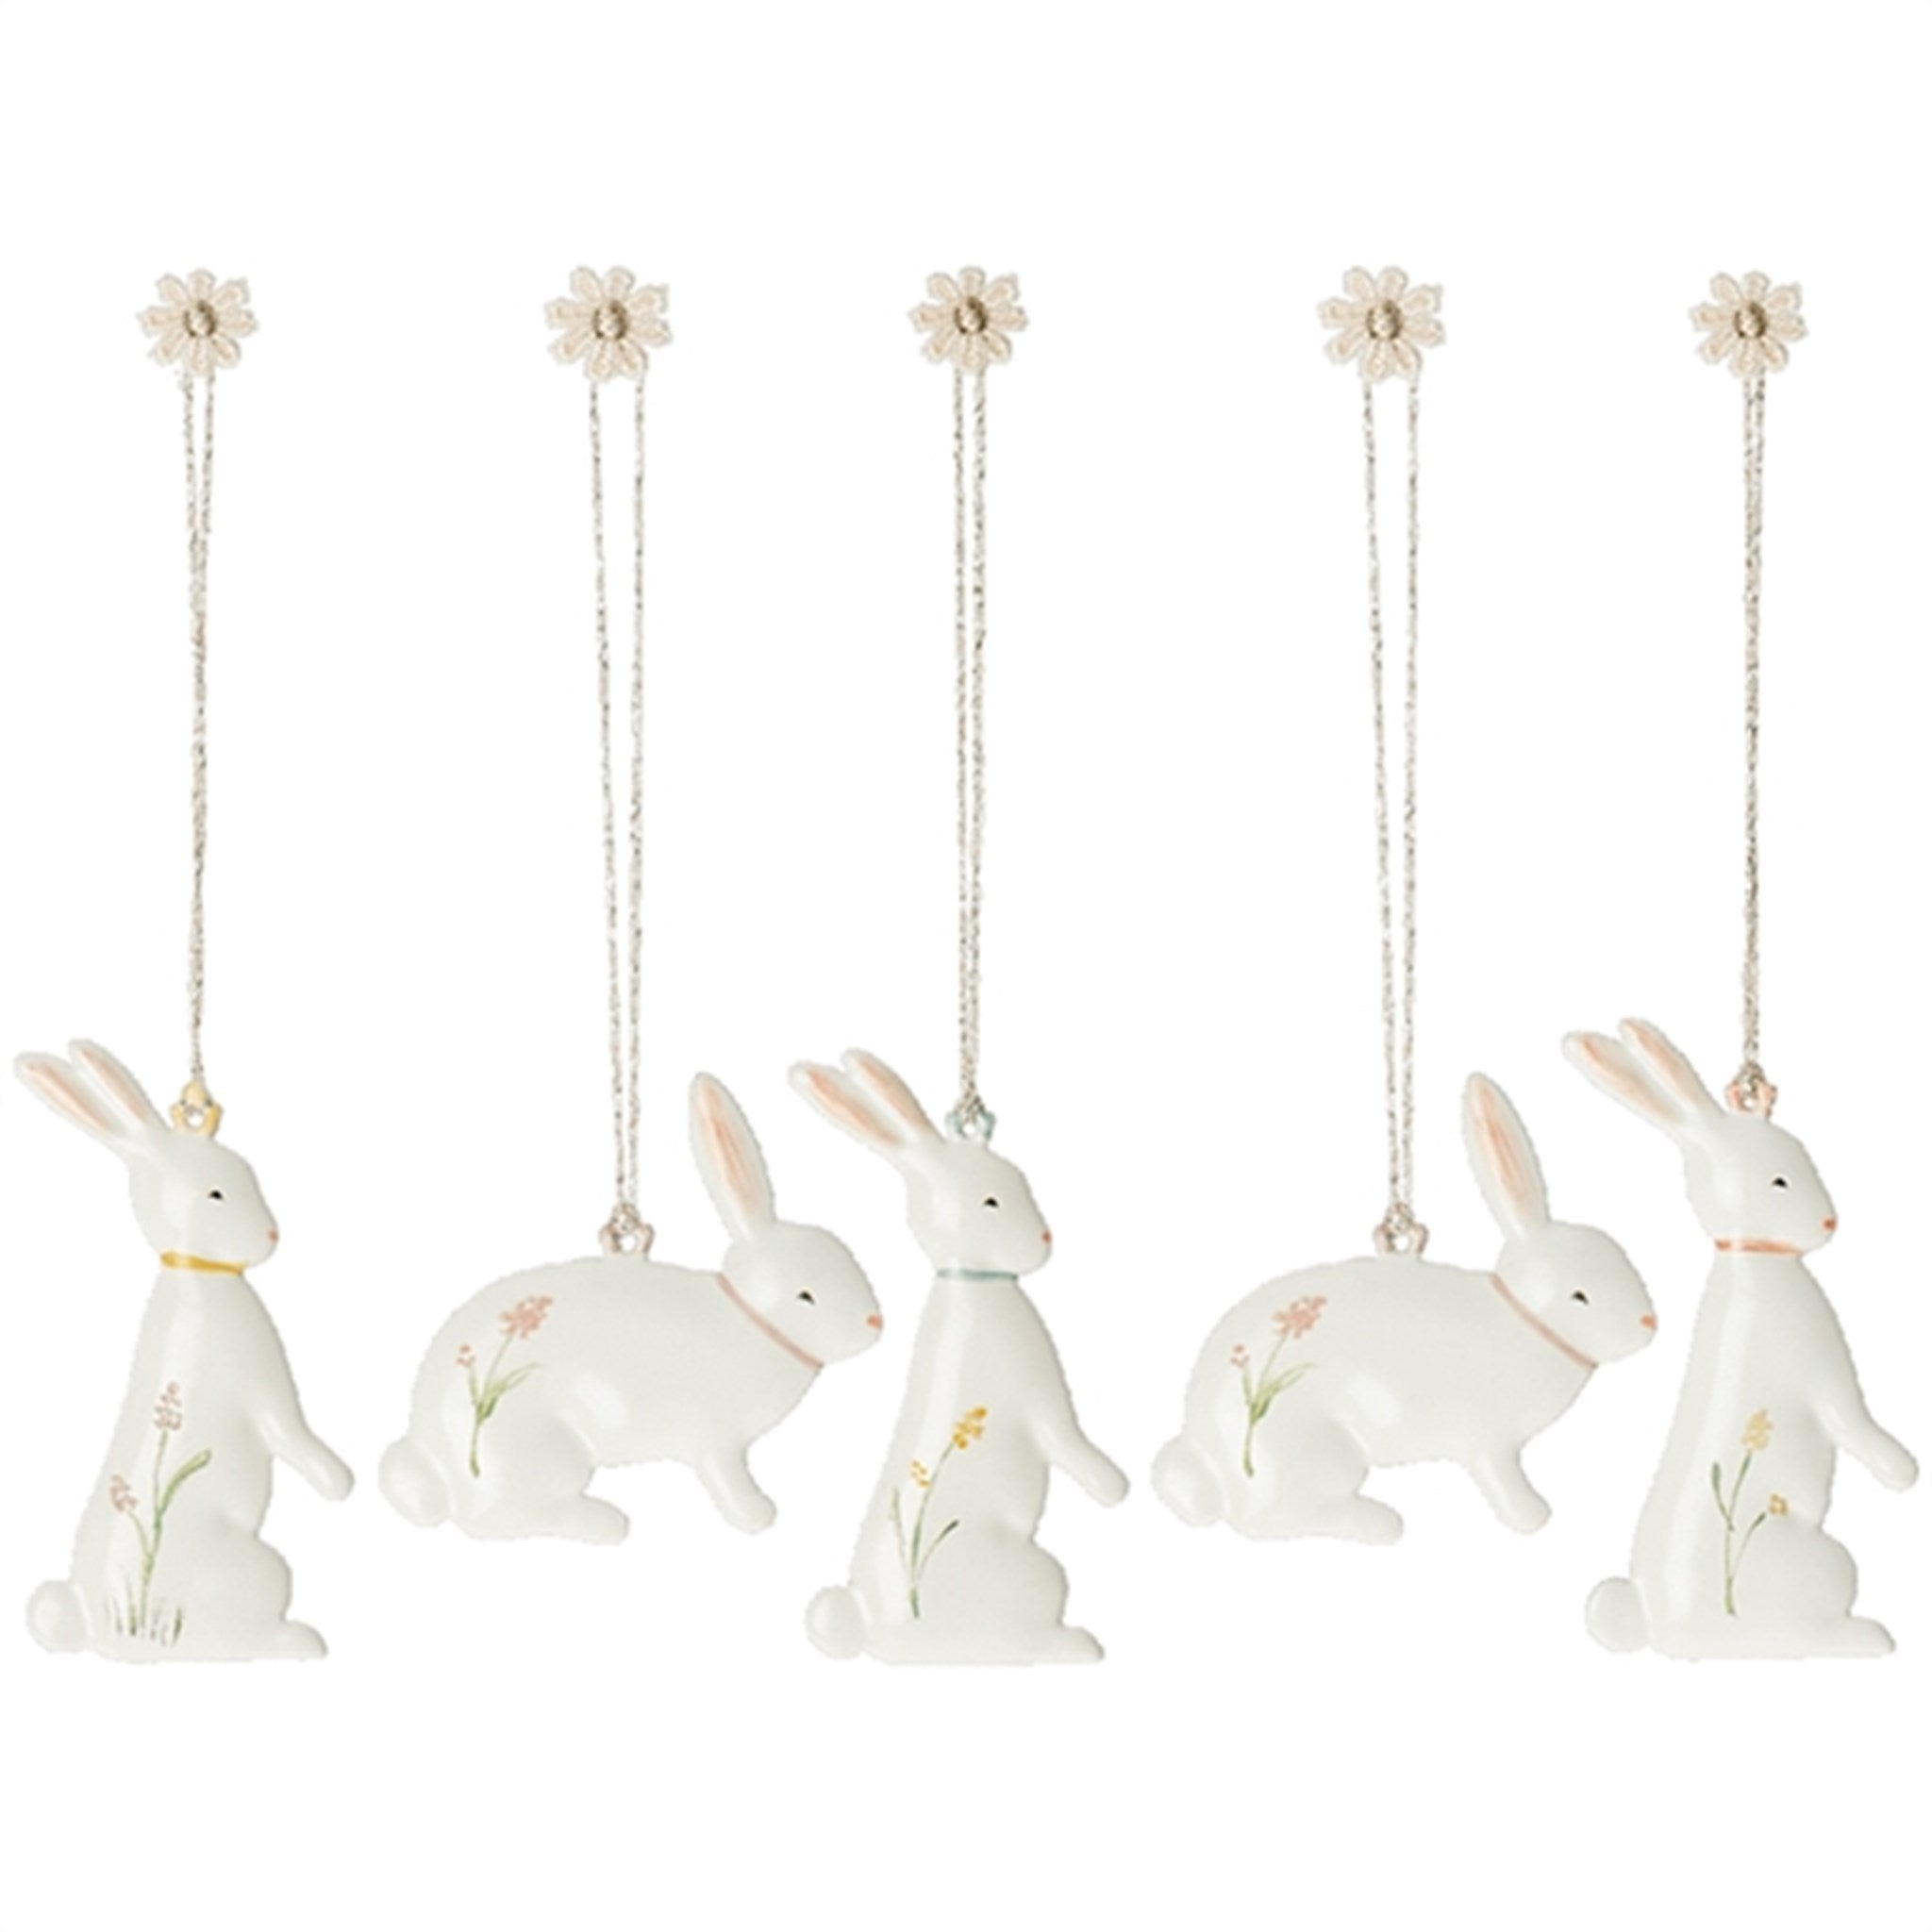 Maileg Easter Decorations Easter Bunny 5 pcs